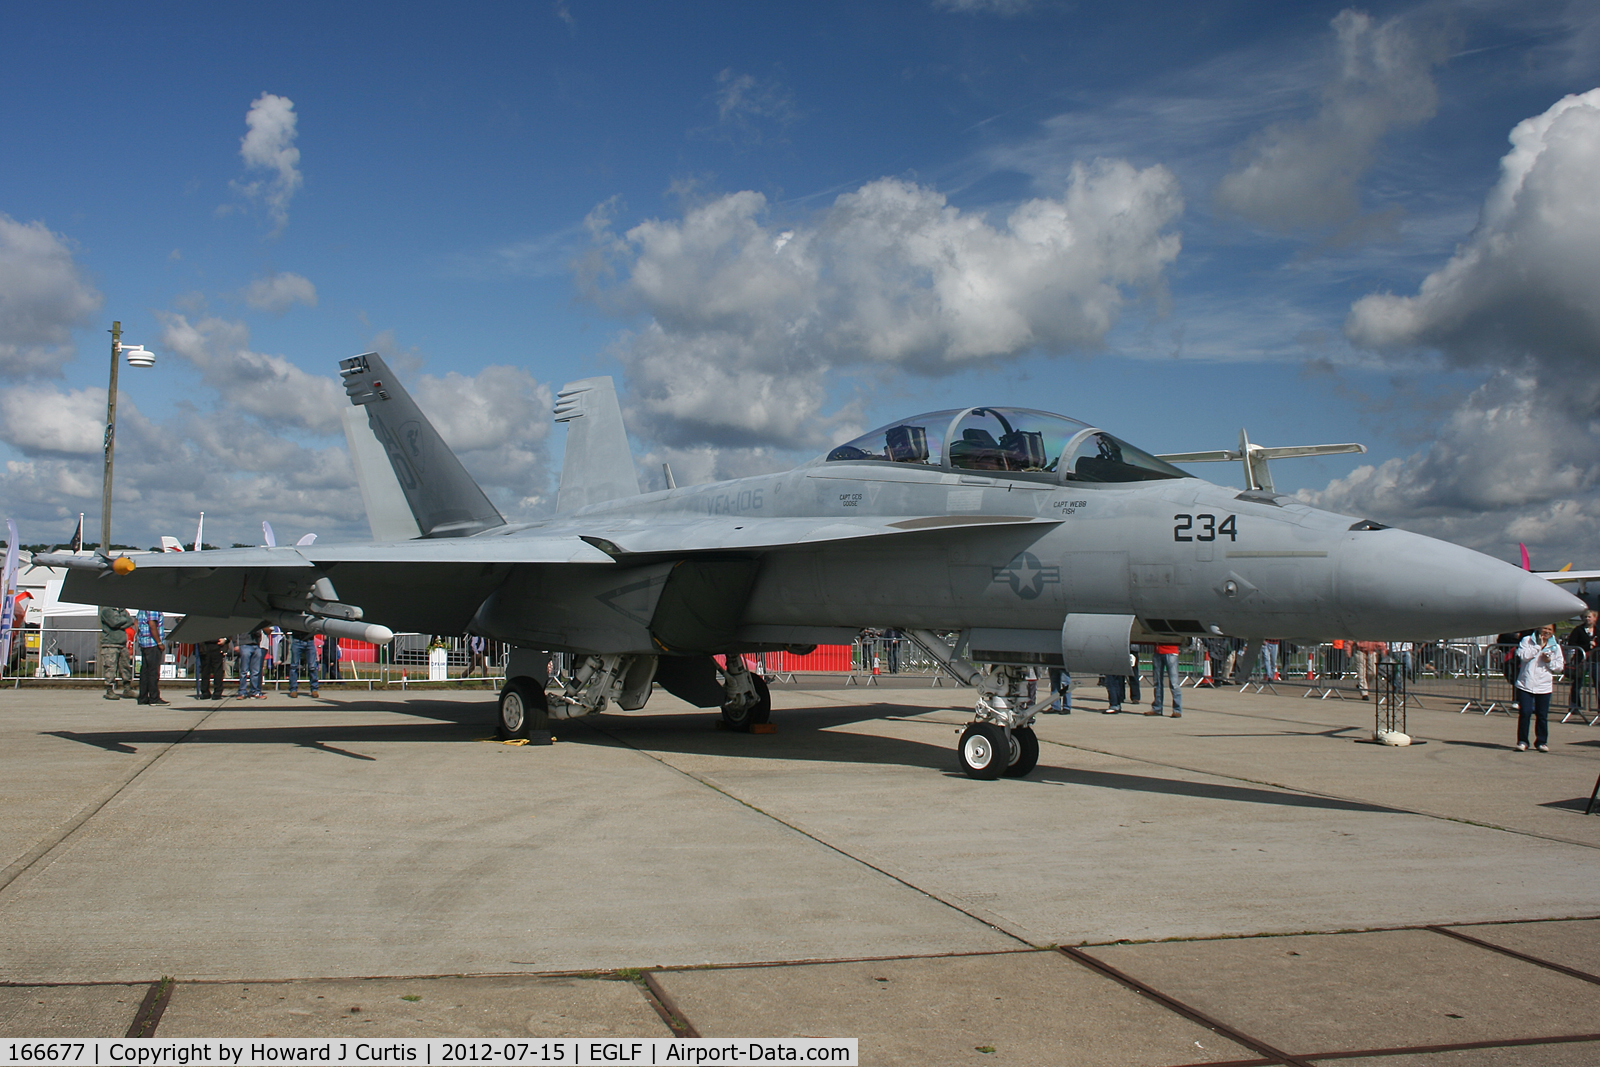 166677, Boeing F/A-18F Super Hornet C/N F155, In the static display at the Farnborough Air Show.